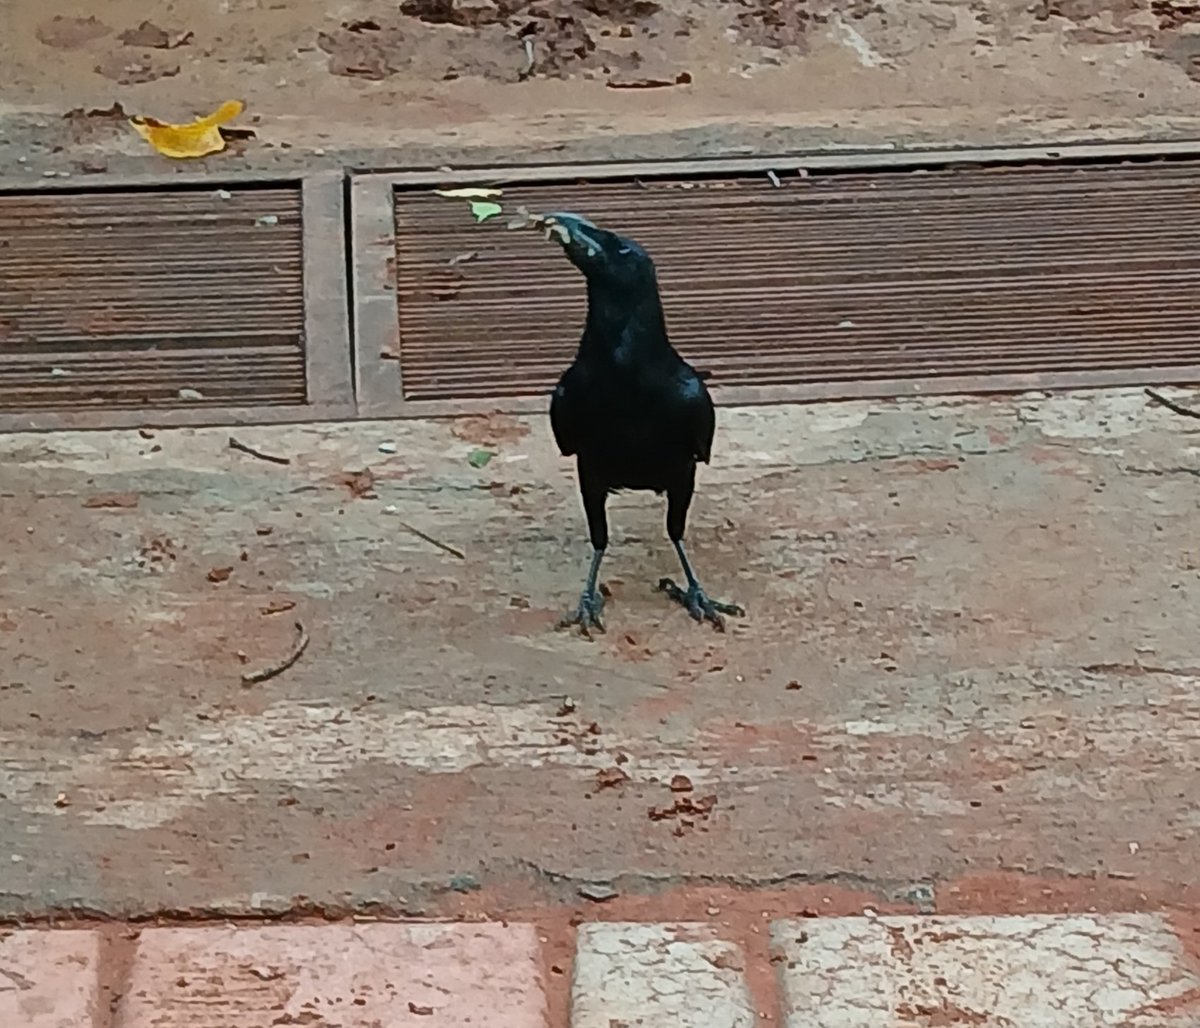 A crow & a hornbill competing to catch the winged ants emerging after first rains. The crow dominated. #backyardbirds #IndiAves #drama #TwitterNatureCommunity #birdwatching